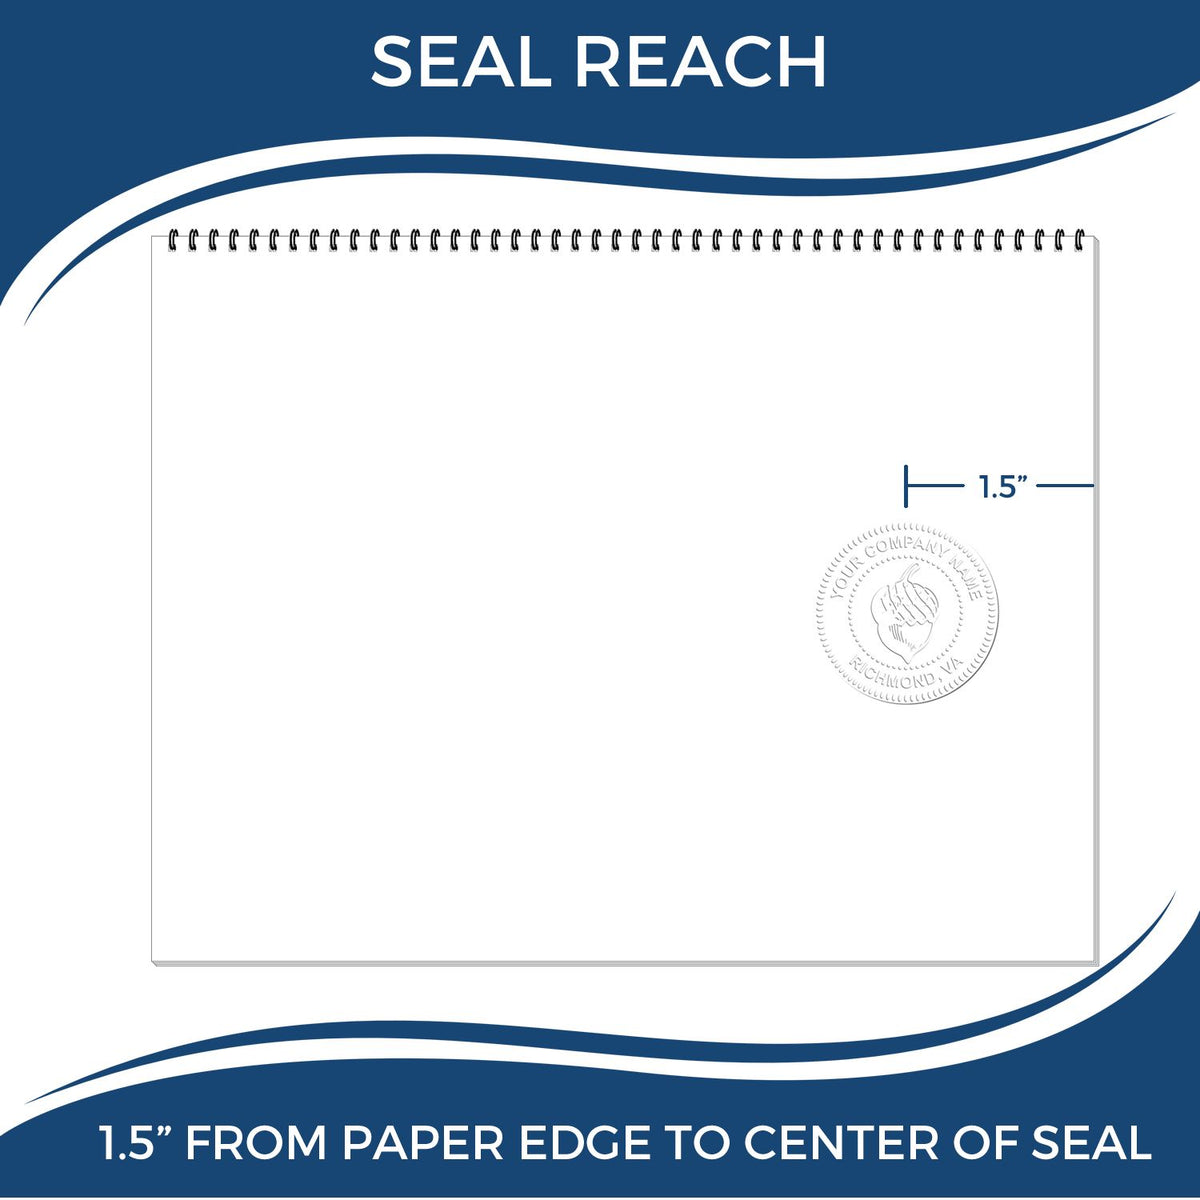 An infographic showing the seal reach which is represented by a ruler and a miniature seal image of the Soft North Carolina Professional Geologist Seal